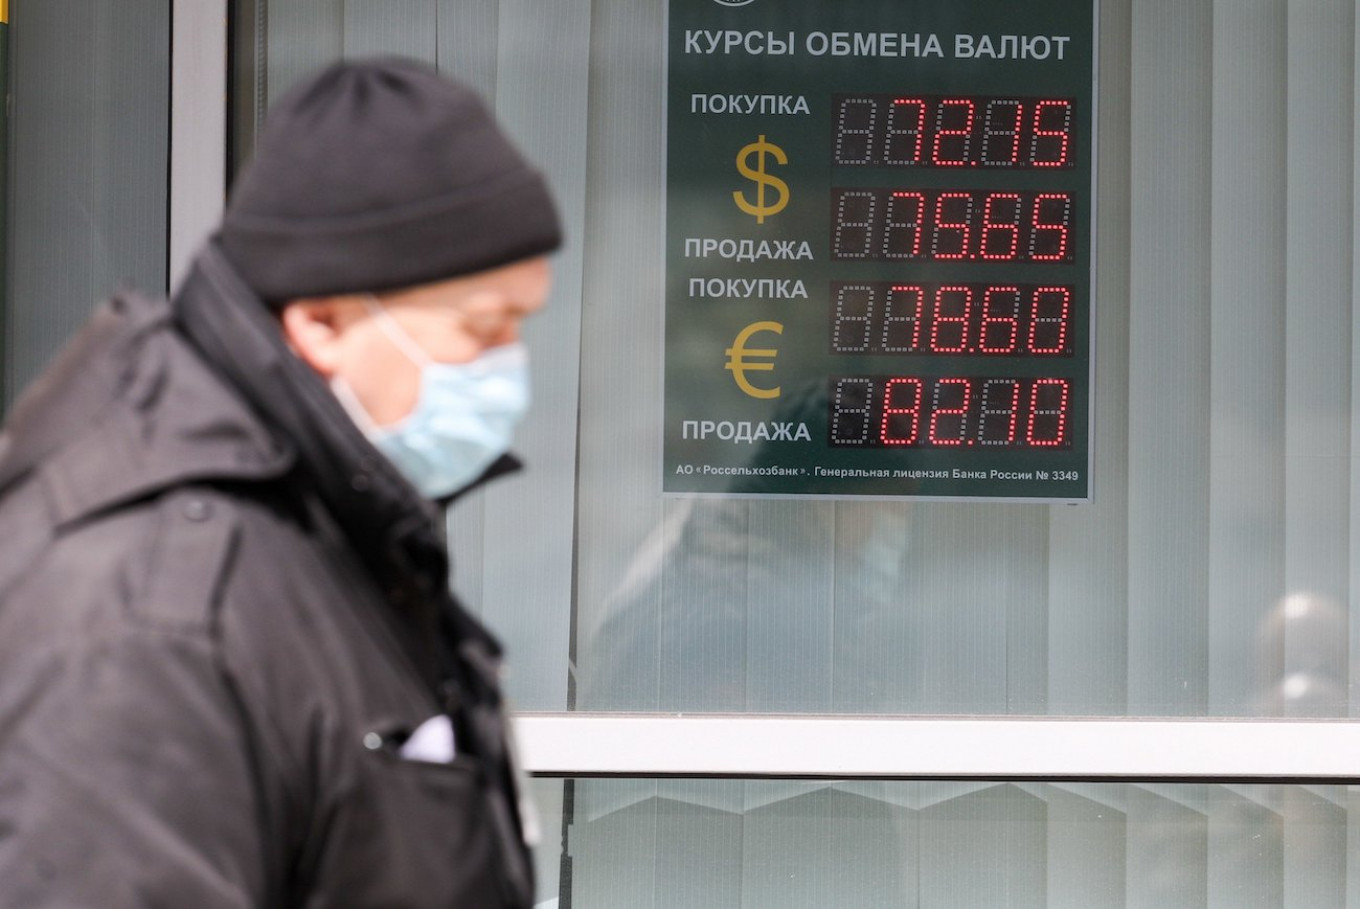 Russian Ruble Drops to Almost 5-Year Low Against Euro